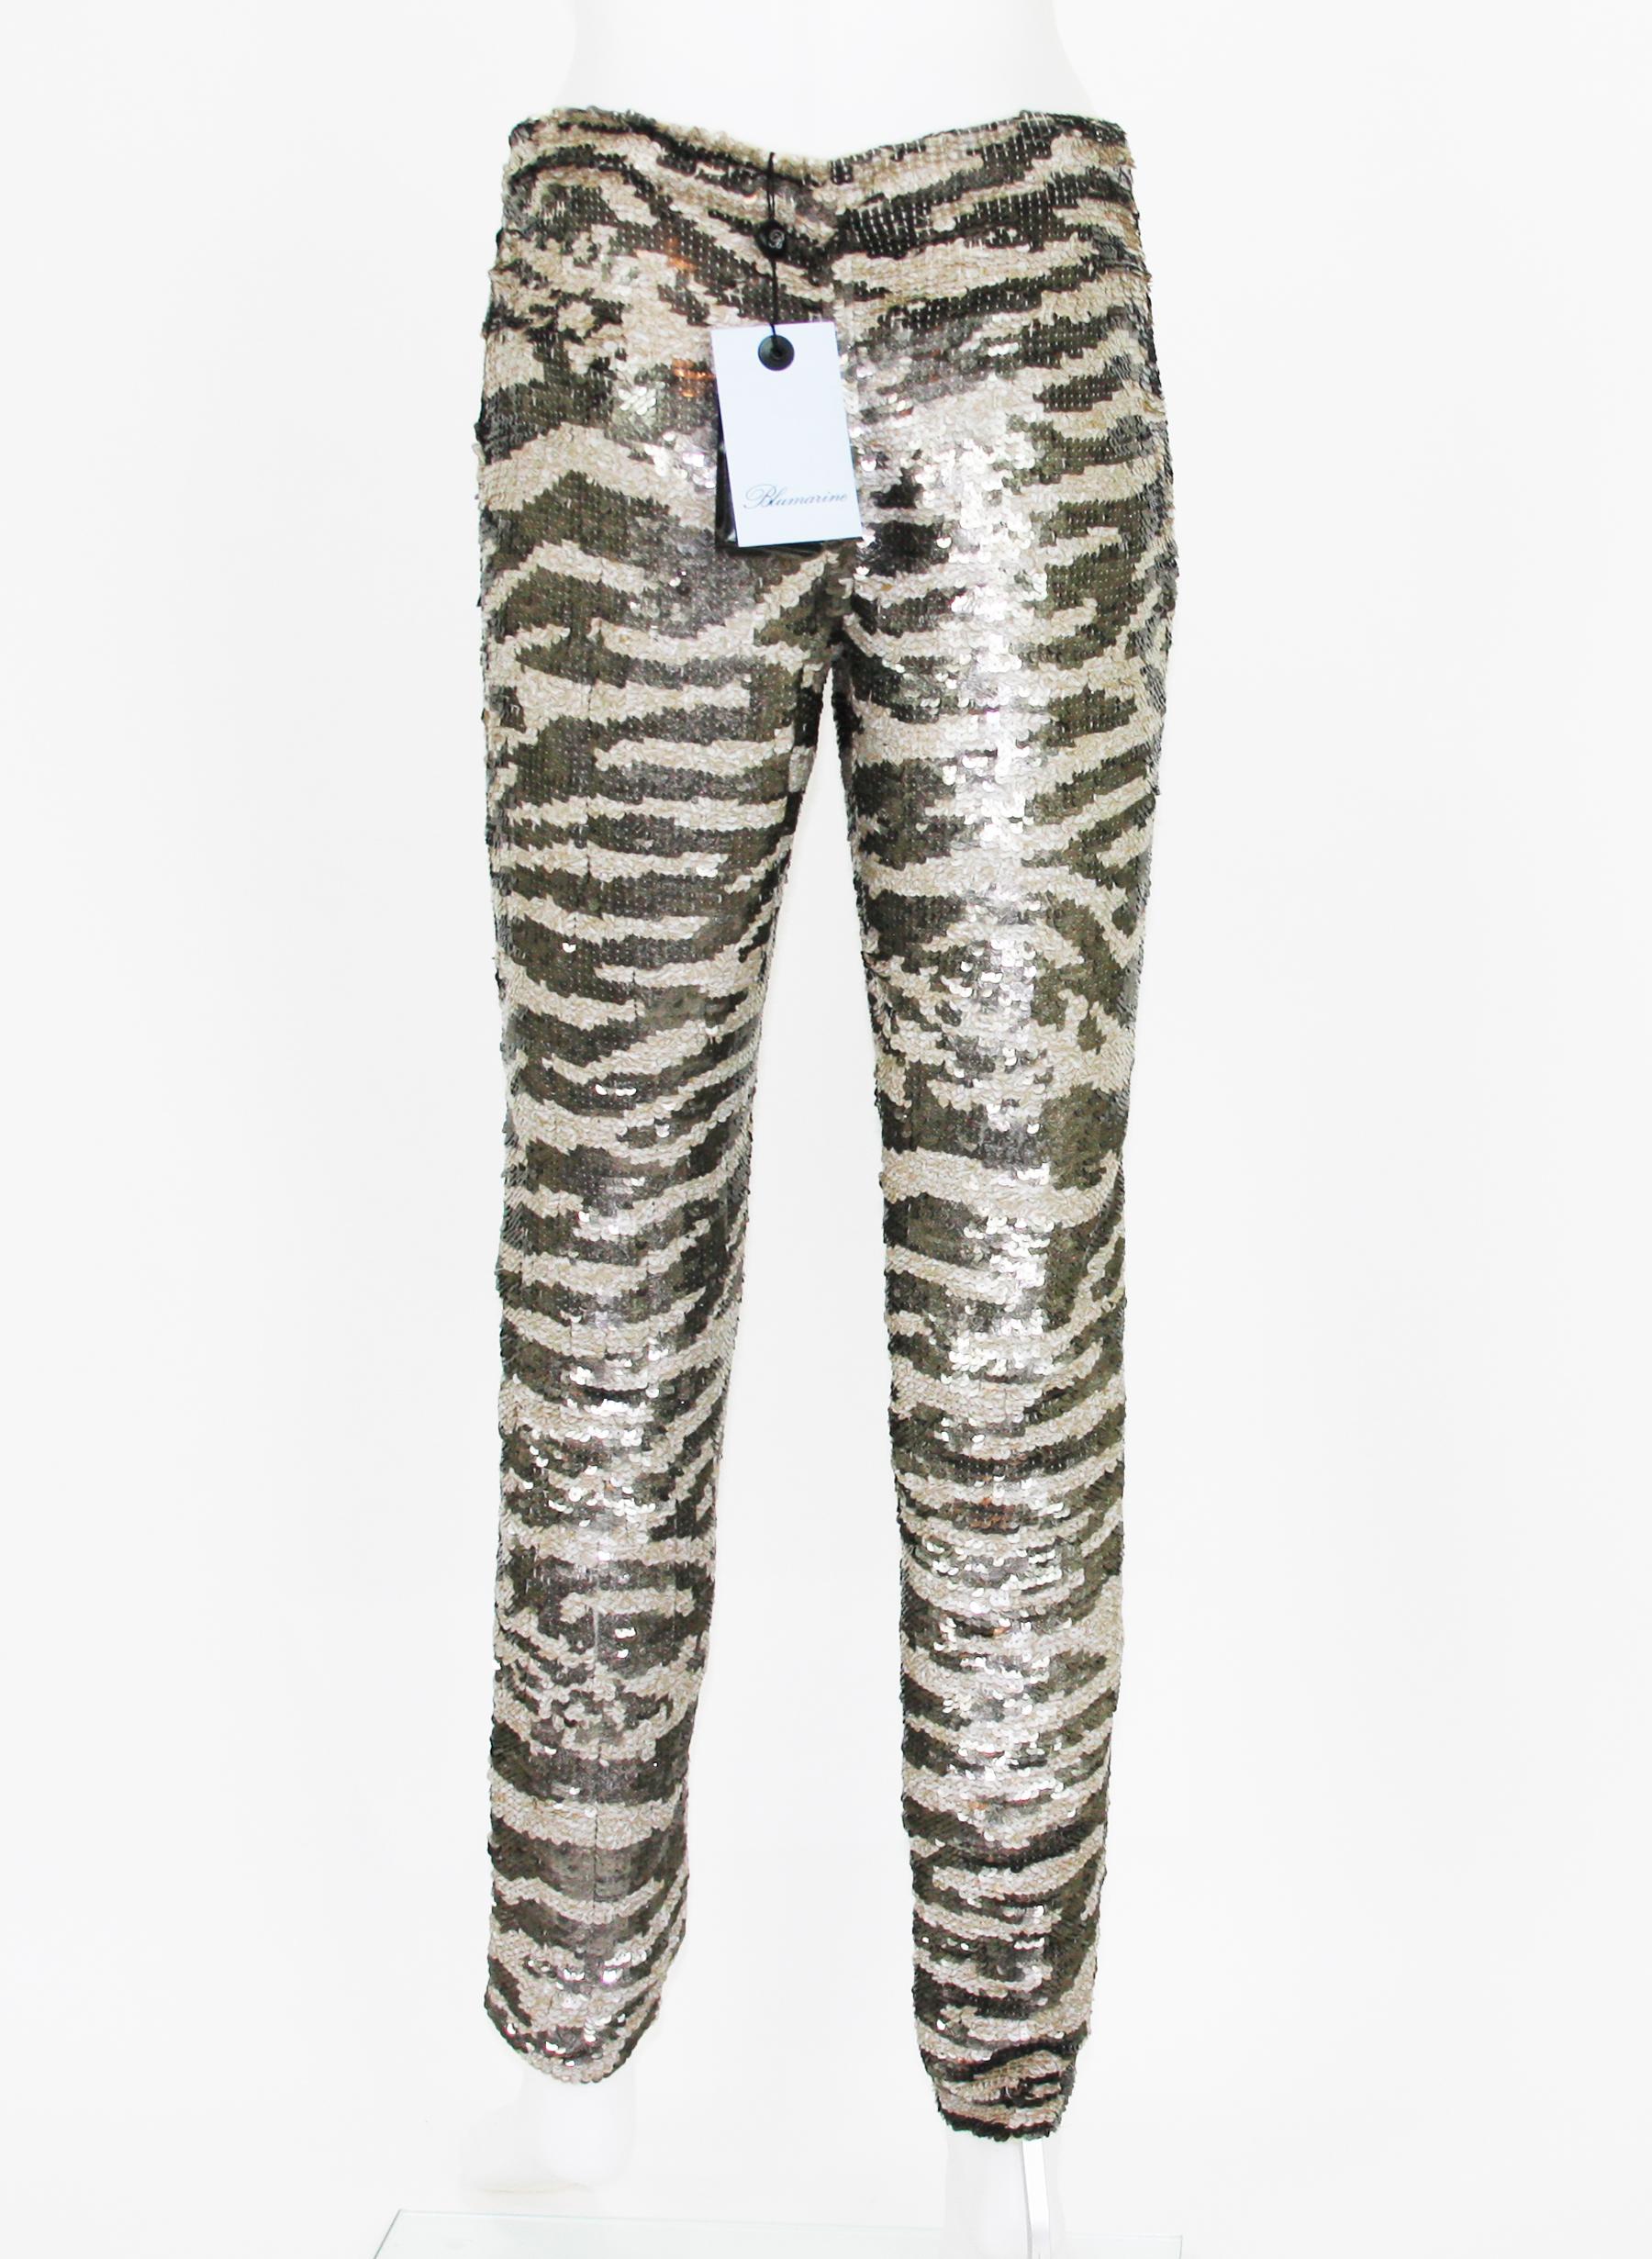 New Blumarine Sequin Evening Stretch Pants Leggings
F/W 2010 Collection
Designer size - 40
Stretch sequin fabric, Tiger print, Fully lined, No zipper, Low waist.
Measurements: total length - 38 inches, rice - 8